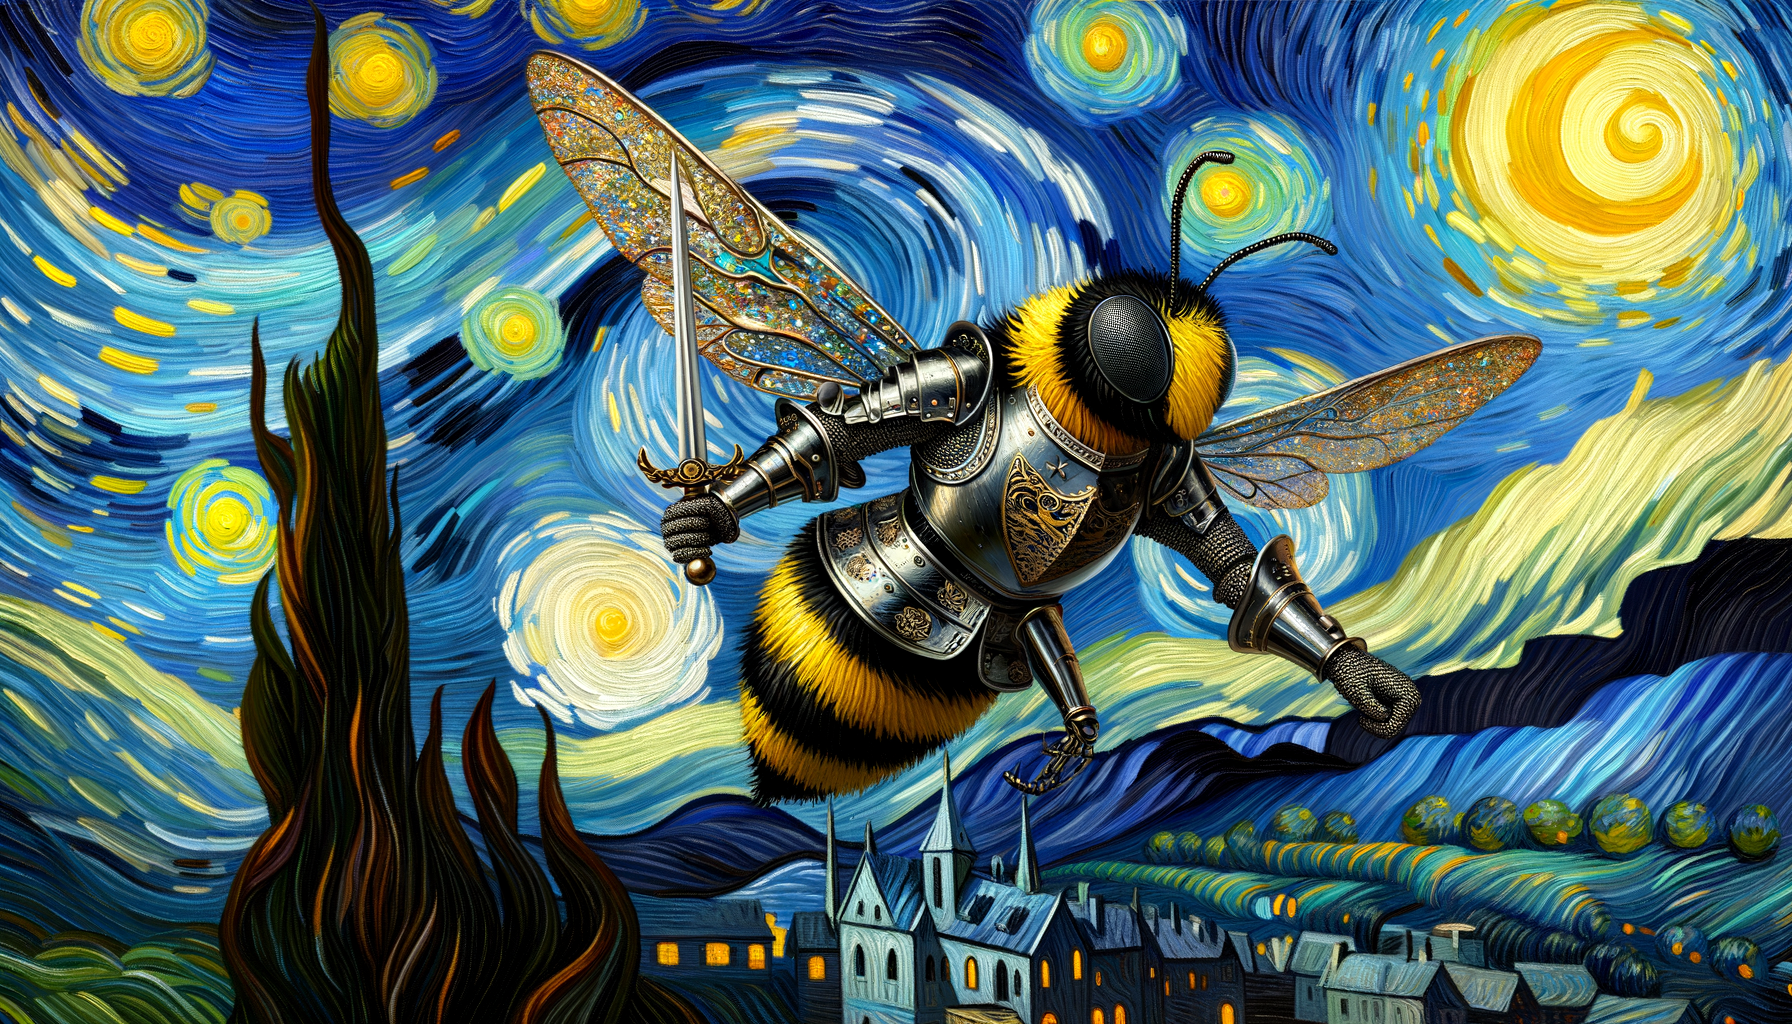 A Bumblebee wearing a knight's armor holding a sword, flying in front of a crooked castle in the style of starry skies by Vincent van Gogh